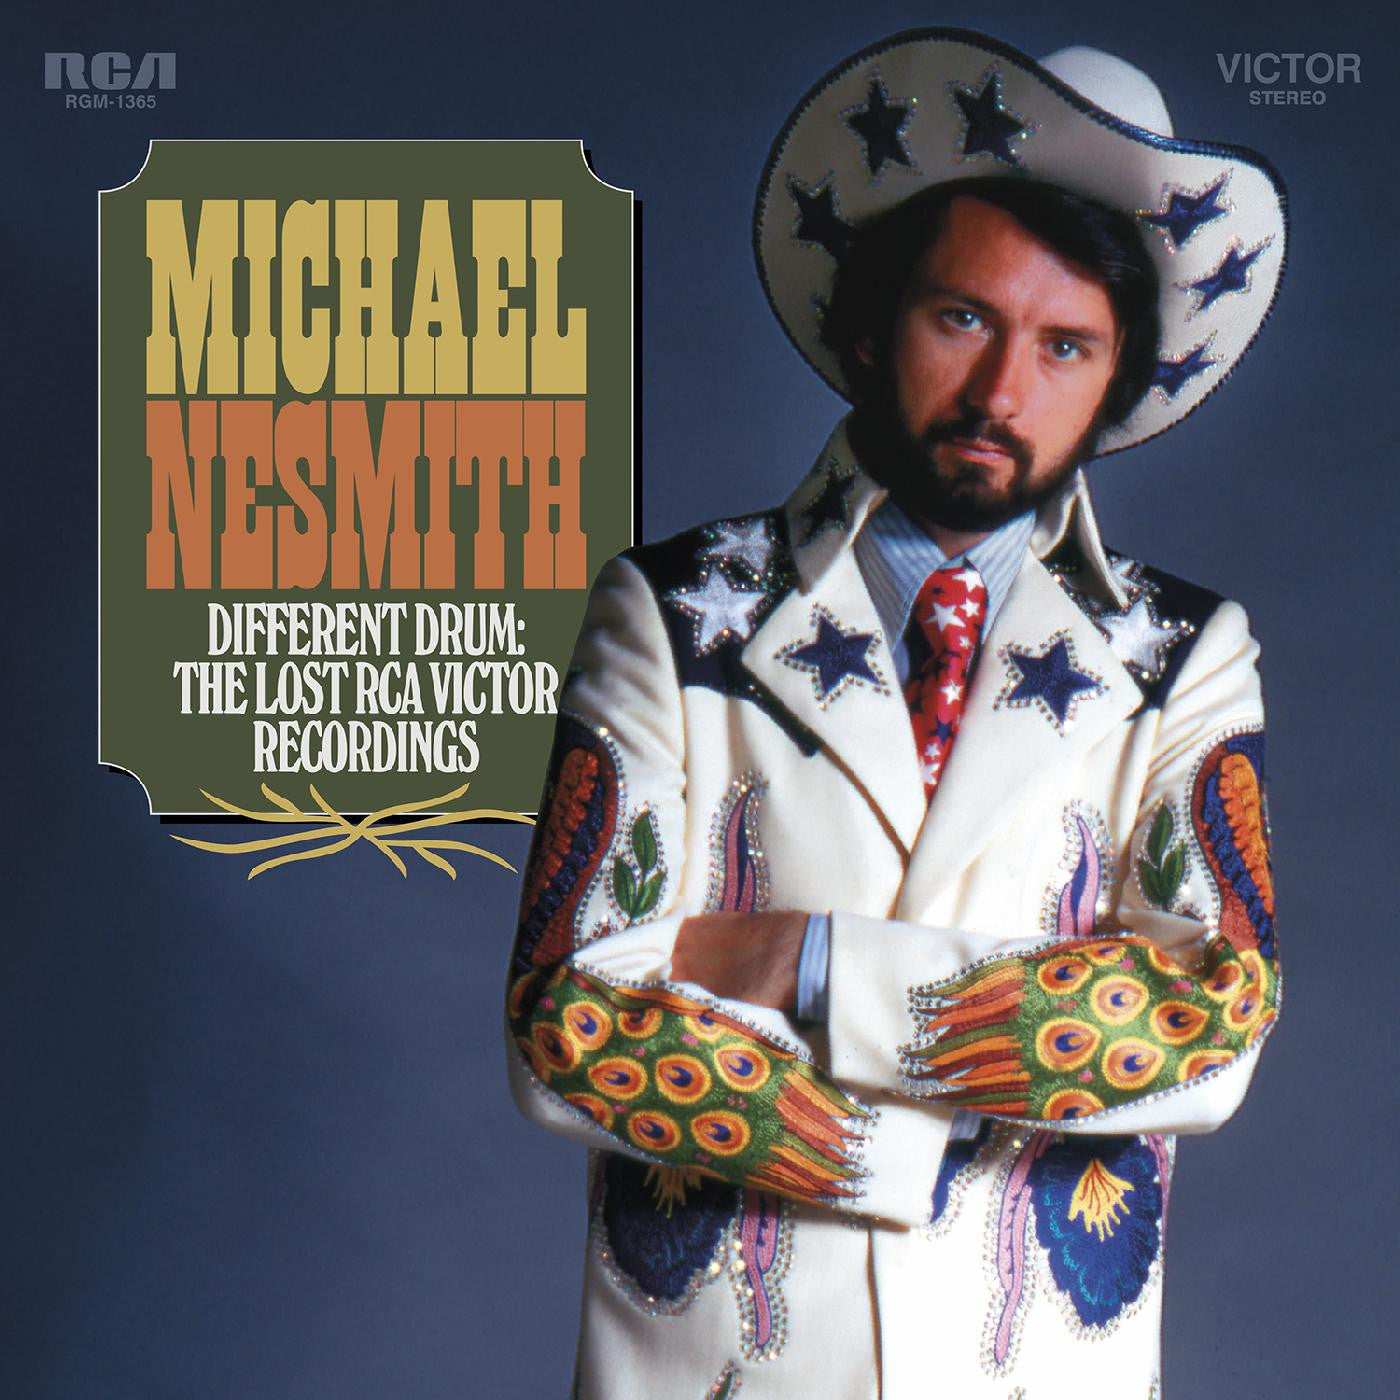 Michael Nesmith - Different Drum (The Lost RCA Victor Recordings) [Blue Smoke Vinyl]